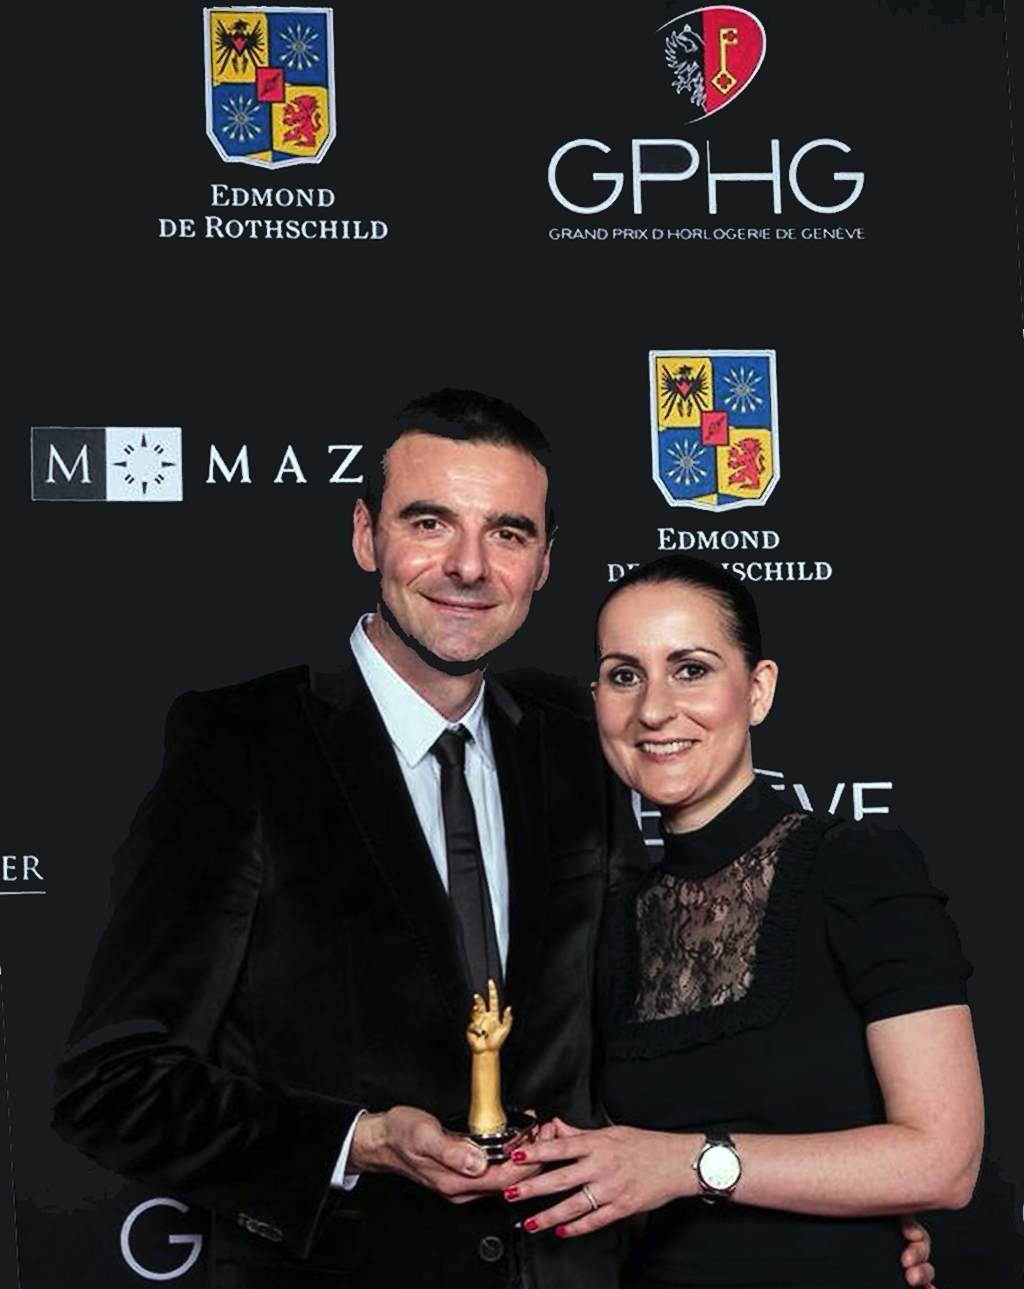 Richard and Maria Habring with their trophy after winning the Grand Prix d’Horlogerie de Genève, the international Watch Oscars, in the "sports watch" category in 2012.